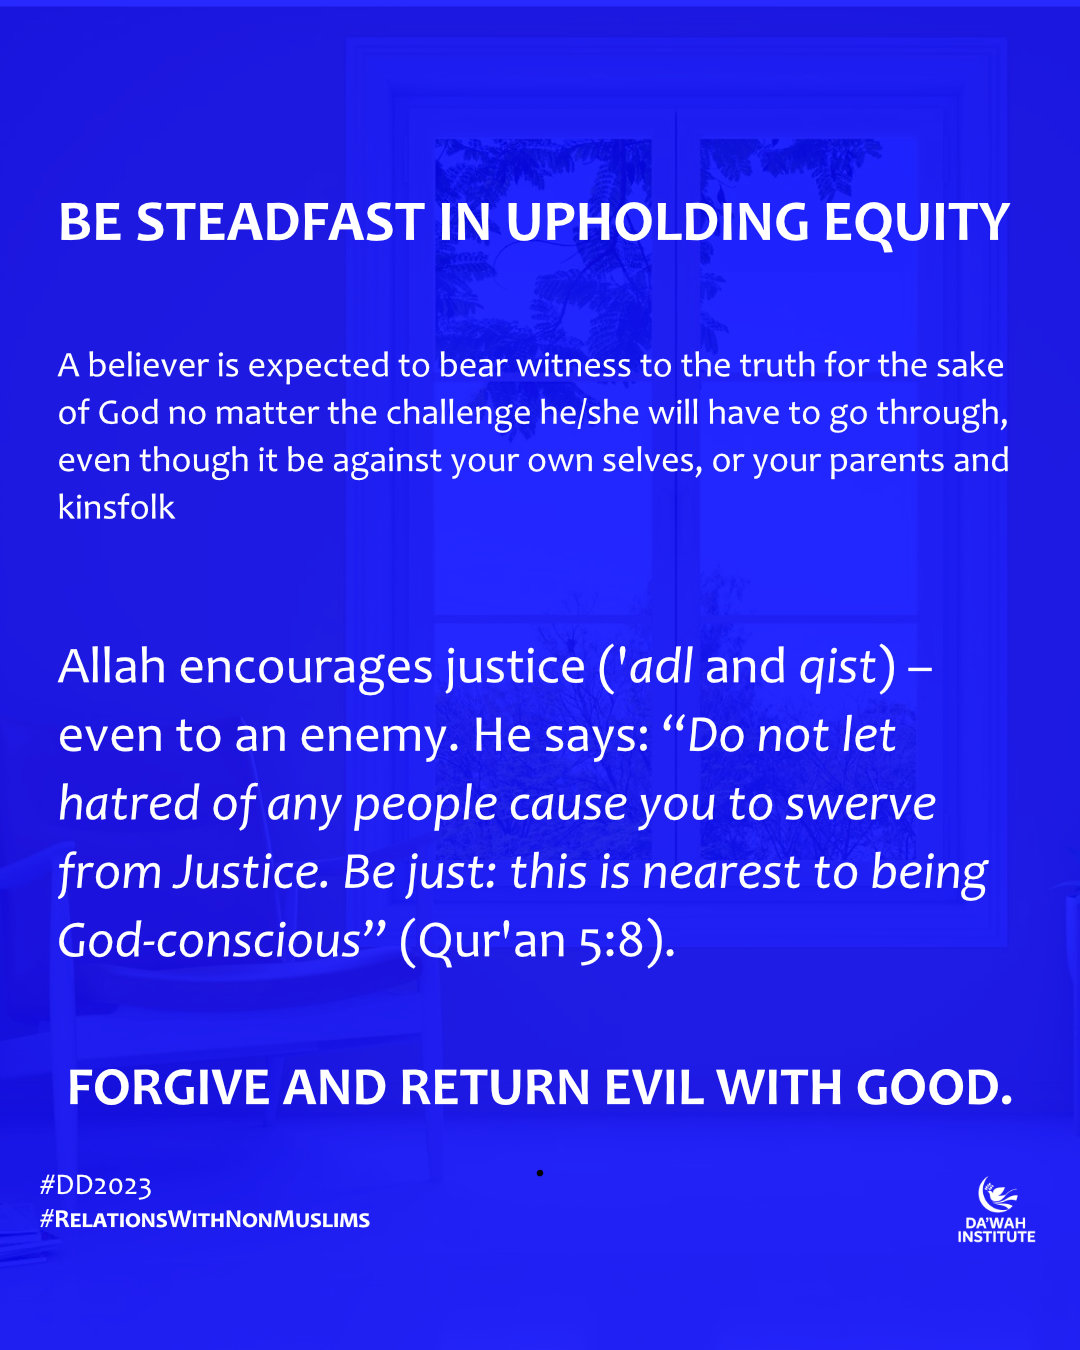 BE STEADFAST IN UPHOLDING EQUITY